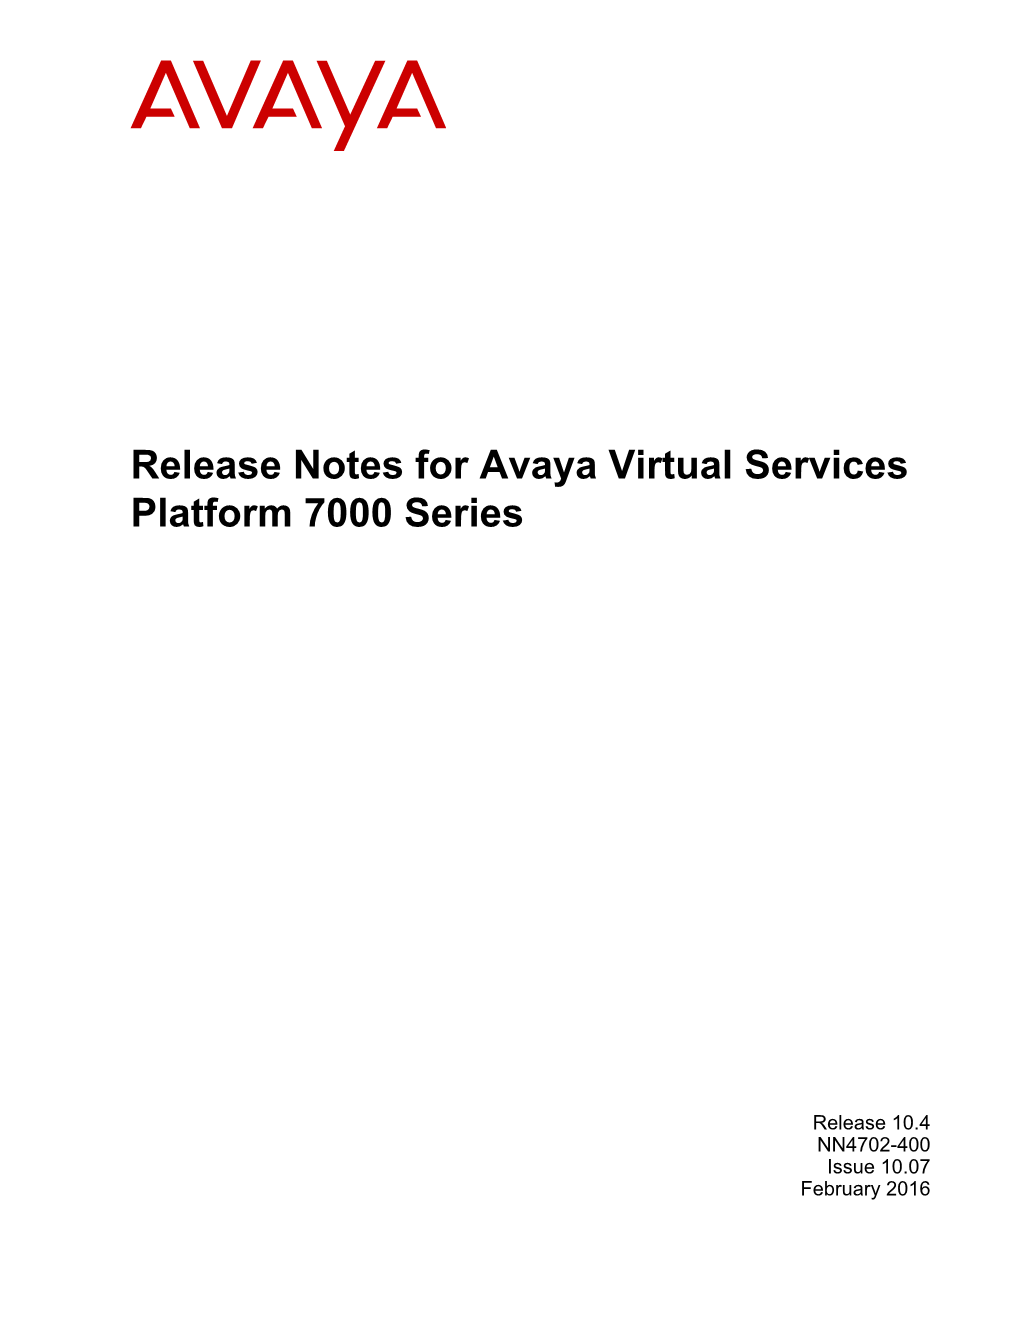 Release Notes for Avaya Virtual Services Platform 7000 Series